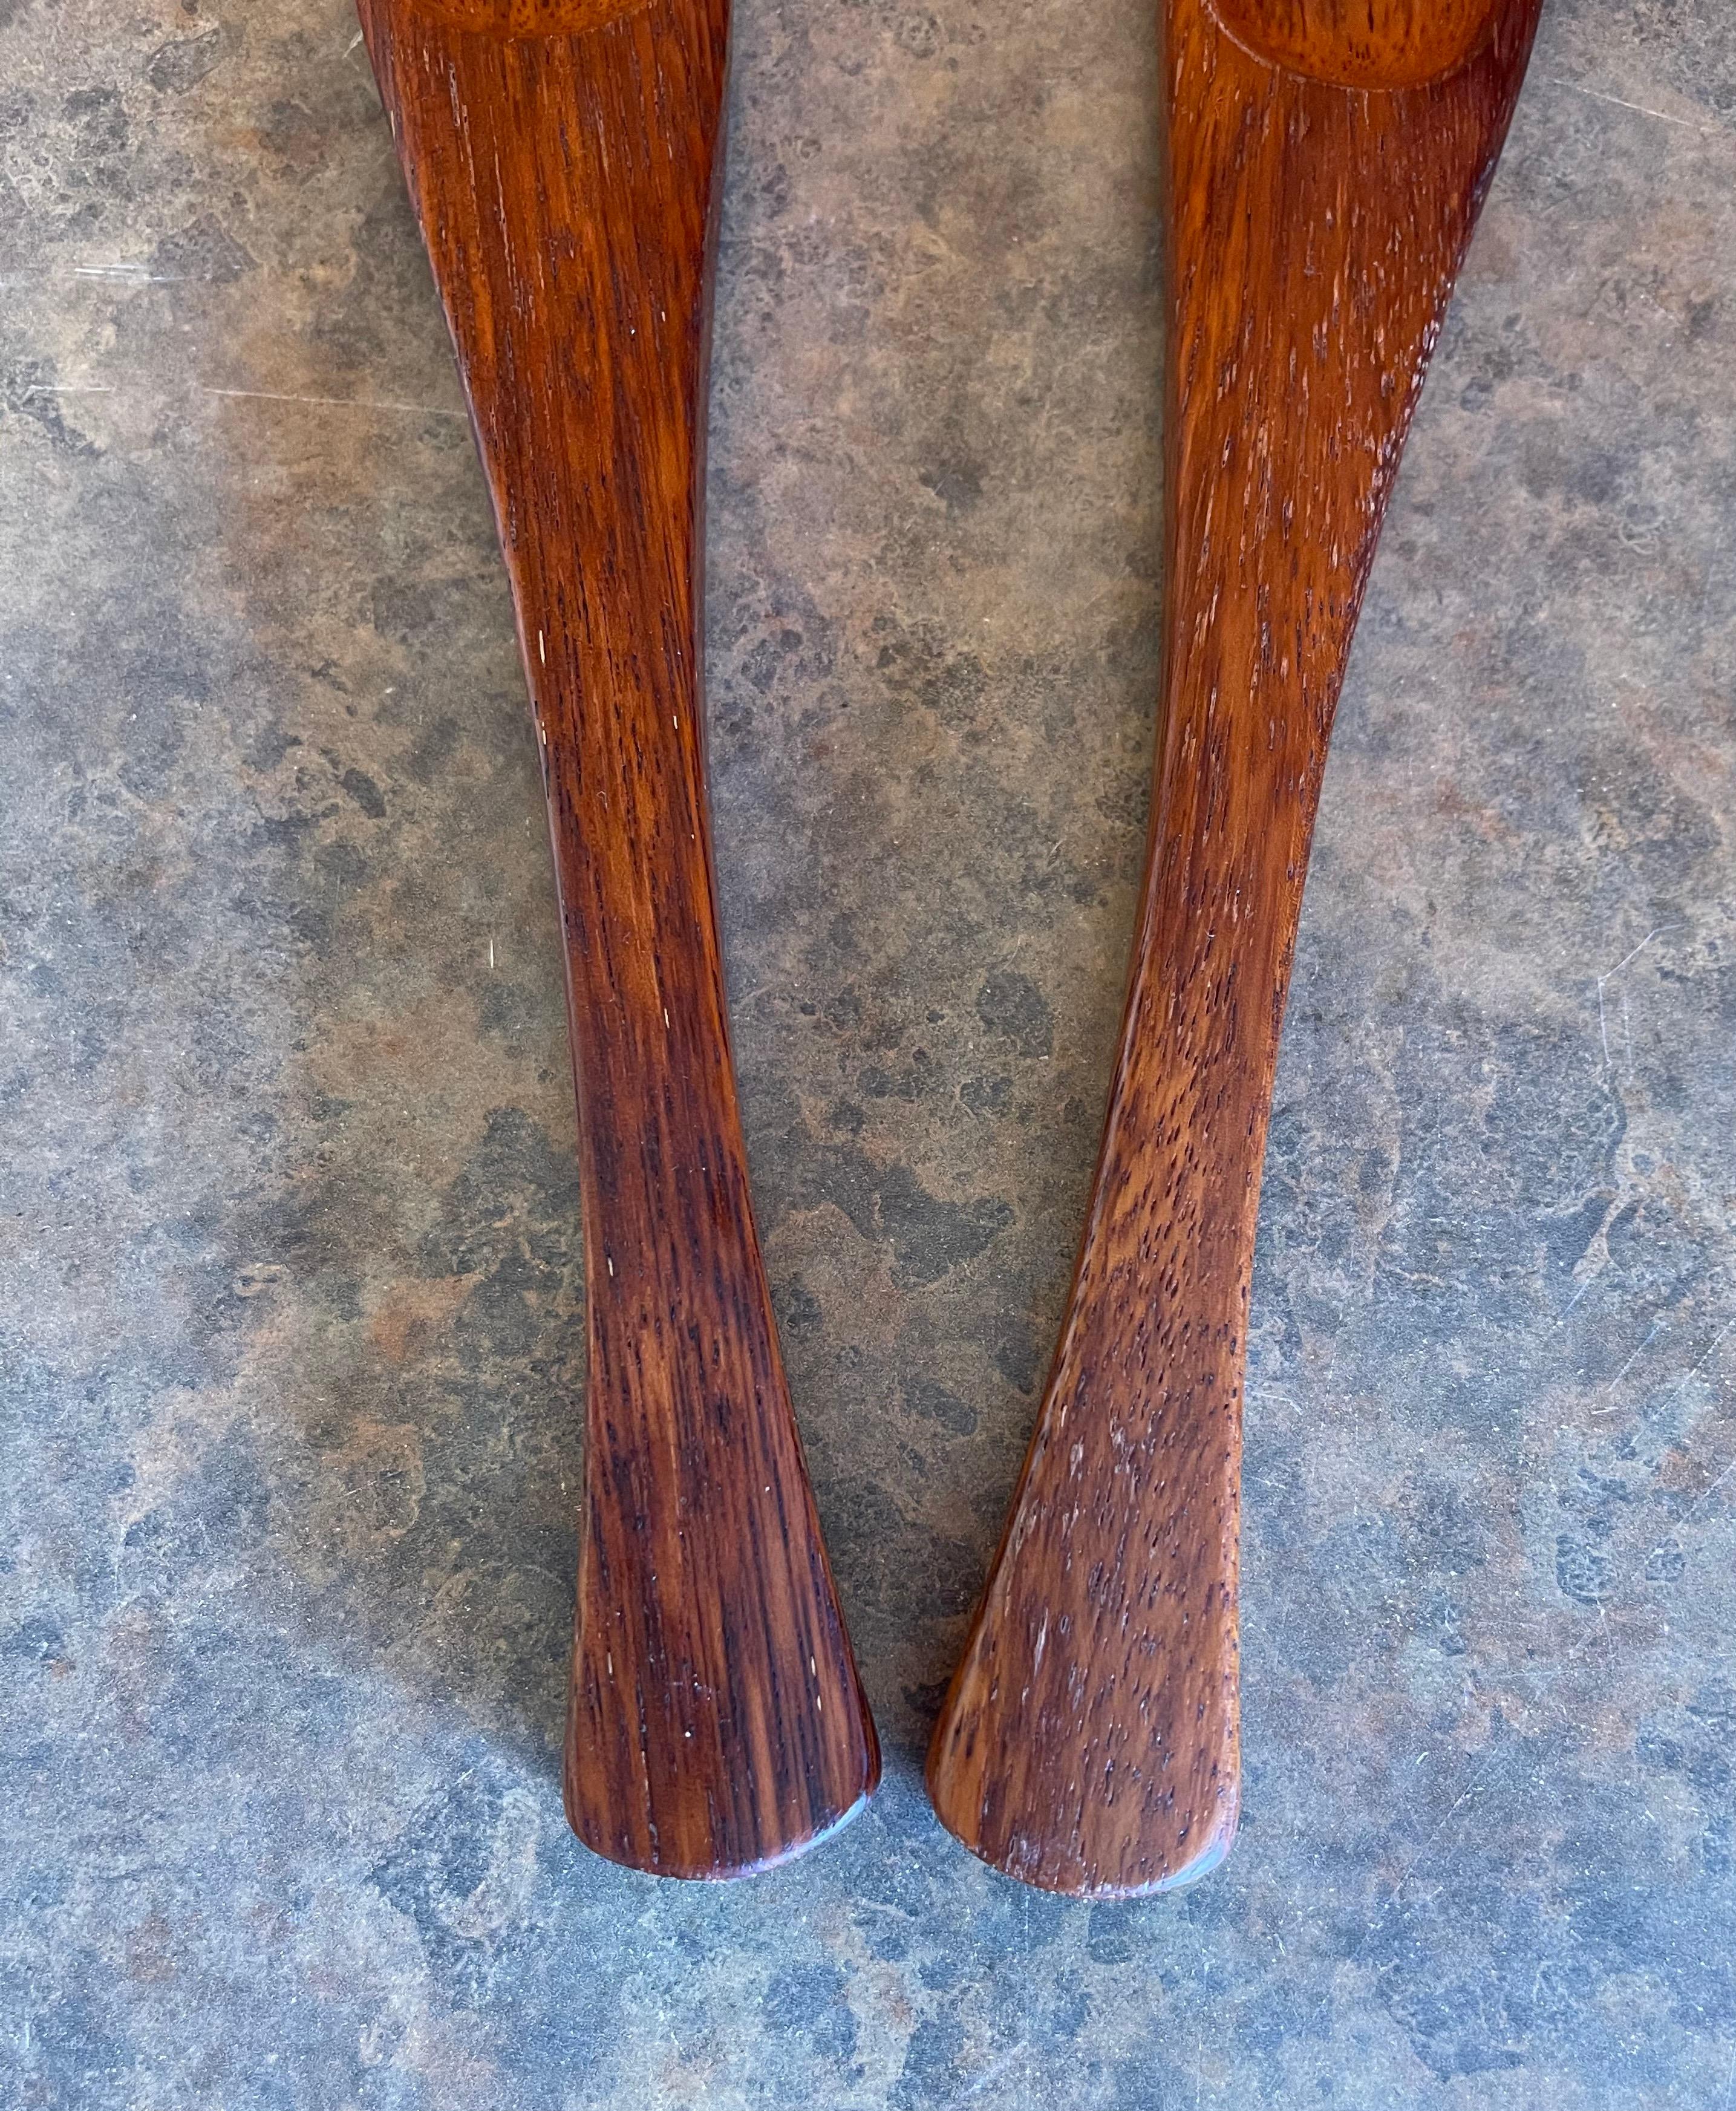 Pair of MCM Teak Salad Servers by Jens Quistgaard for Dansk In Good Condition For Sale In San Diego, CA